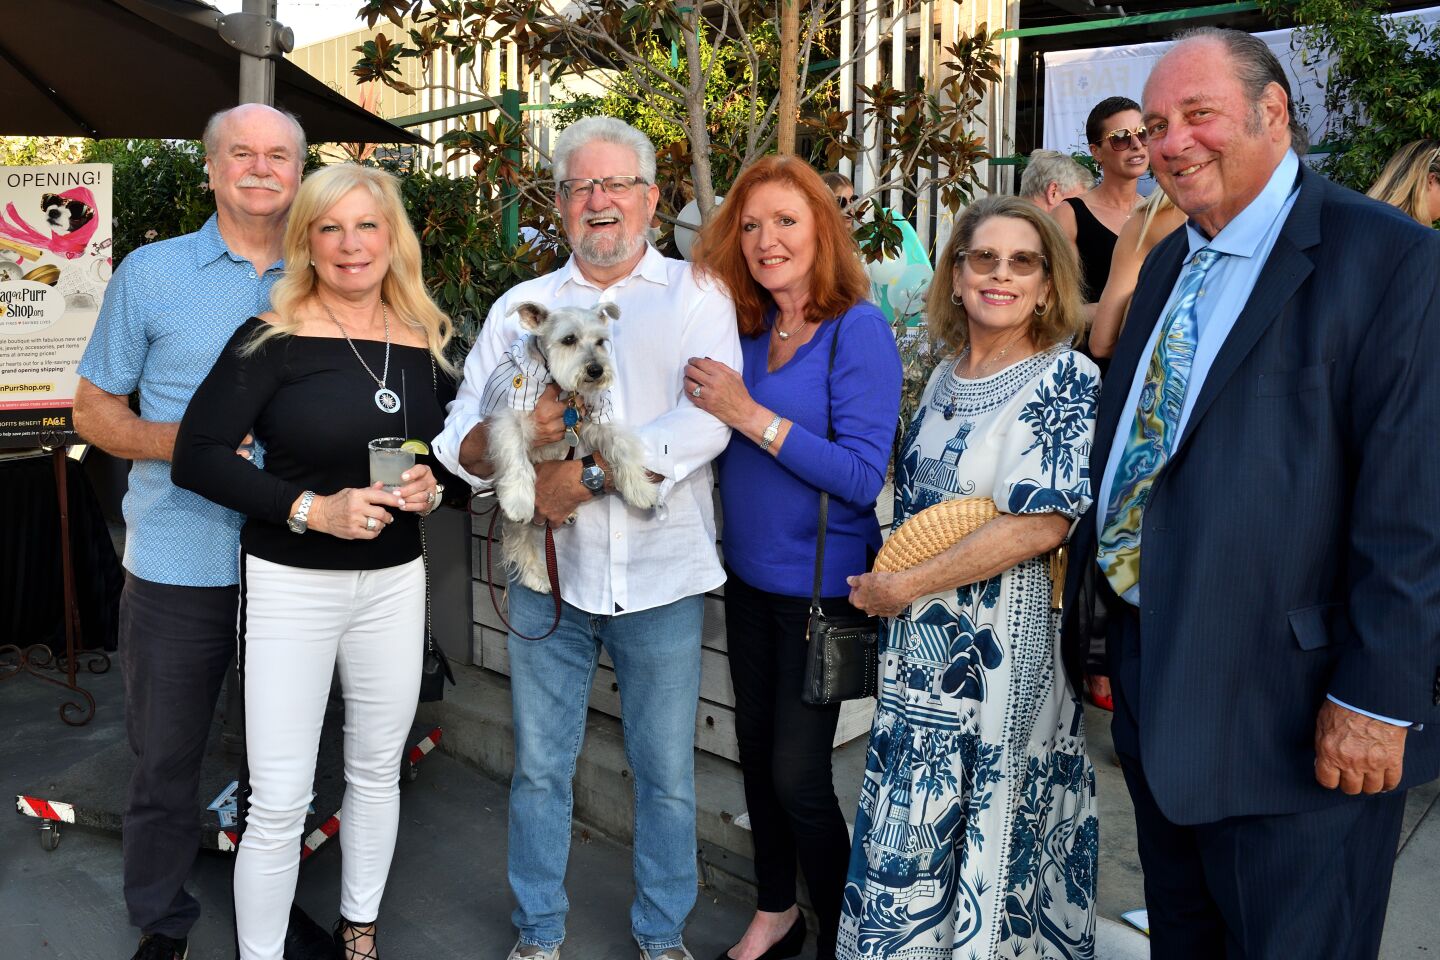 Al and Gina Jordan, FACE Foundation co-founder and board Vice President Howard Finkelstein (with Cooper), Lorin LeGrant and Sherry and Larry Kline